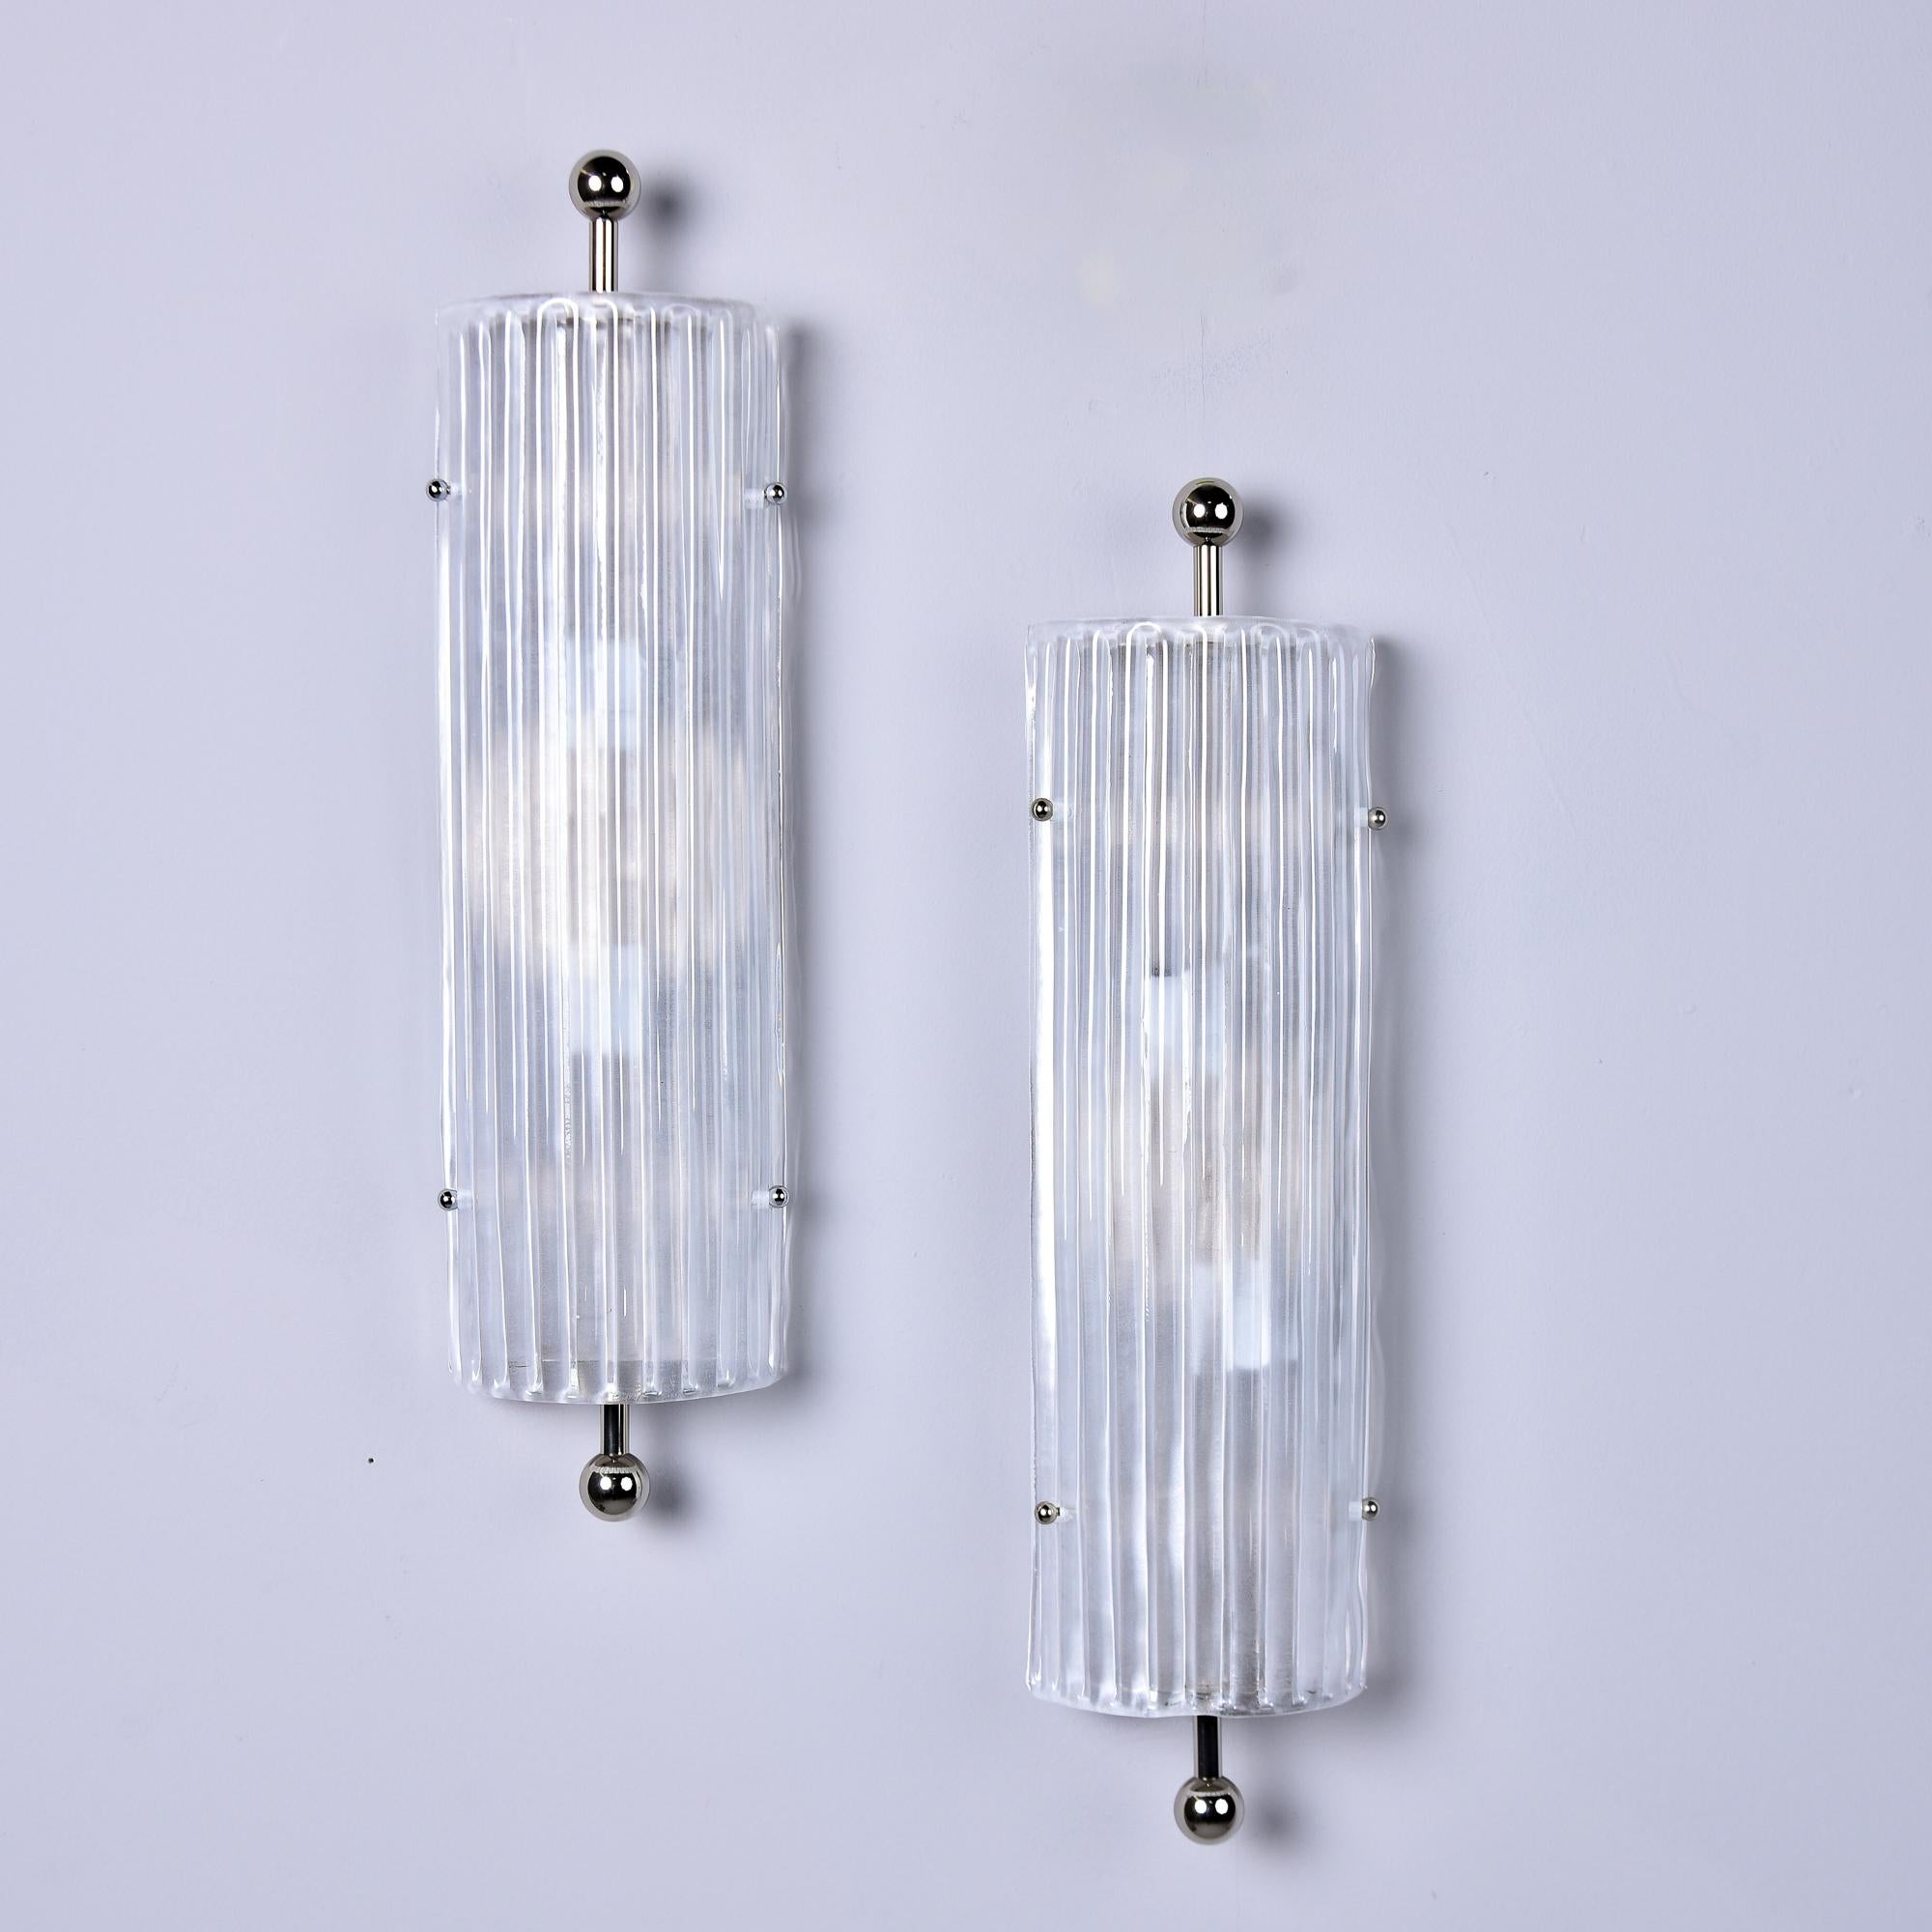 New and made for us in Italy, this pair of sconces feature tall thick Murano glass shades with a ridged surface and polished nickel hardware. Each sconce has two candelabra sockets. Sold and priced as a pair. 

Wired for US electrical standards.